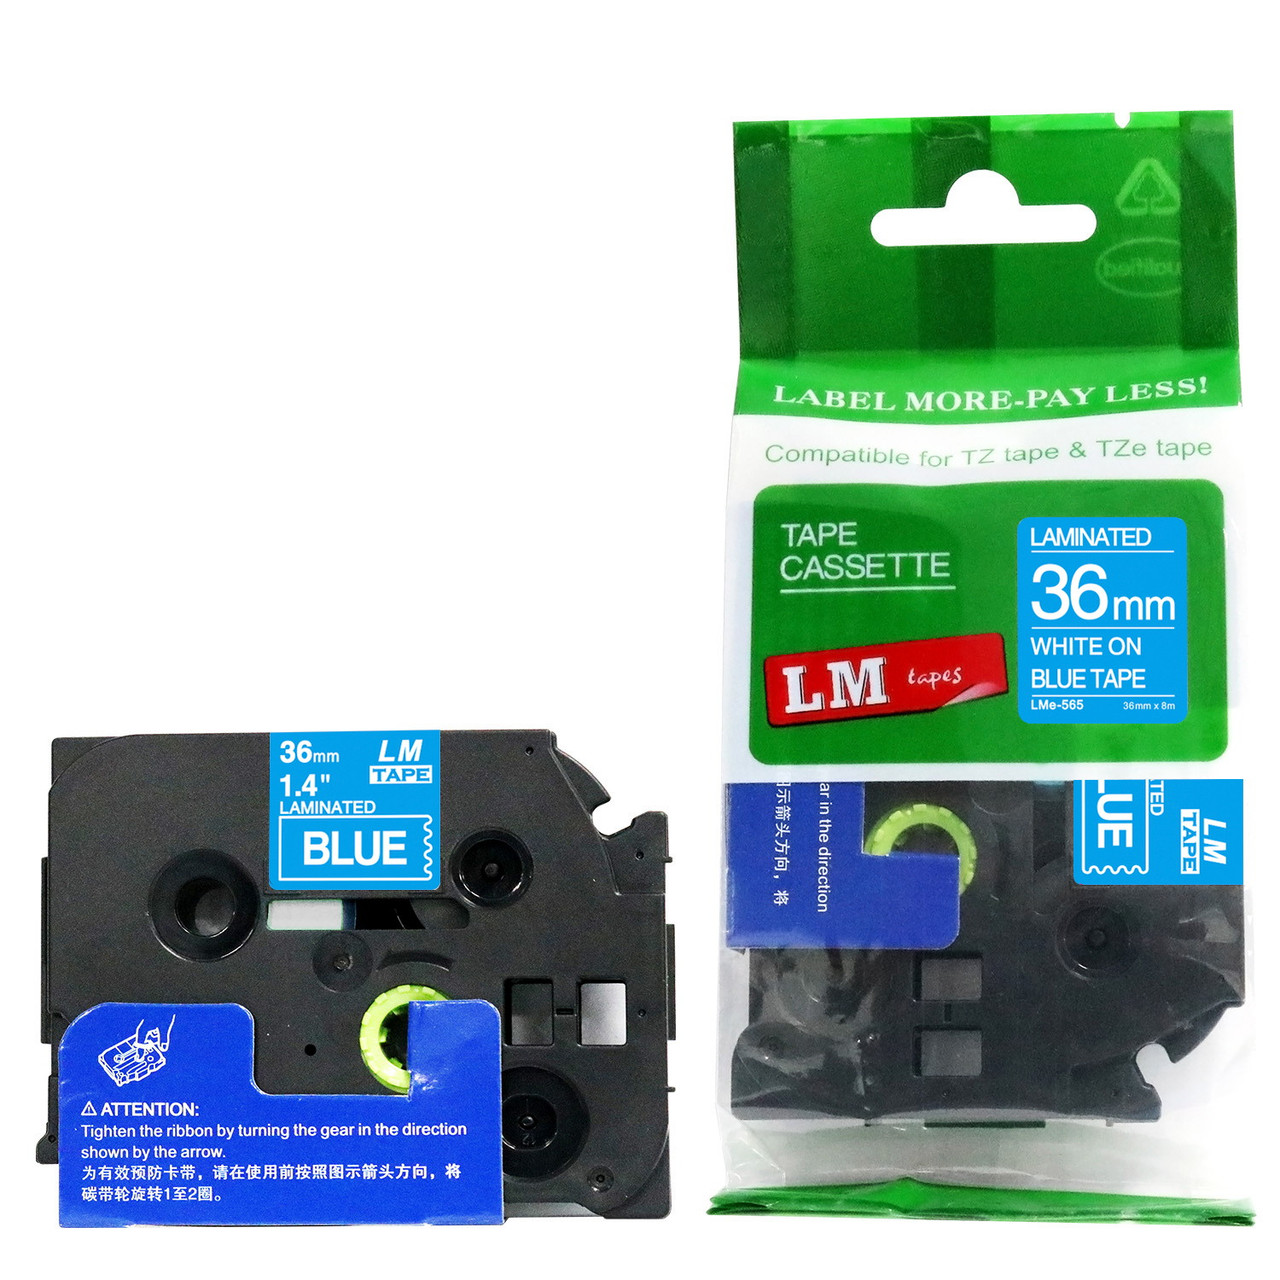 8m Blue on Clear Label Tape TZ 163 Tze 163 Compatible for Brother P-Touch 36mm 